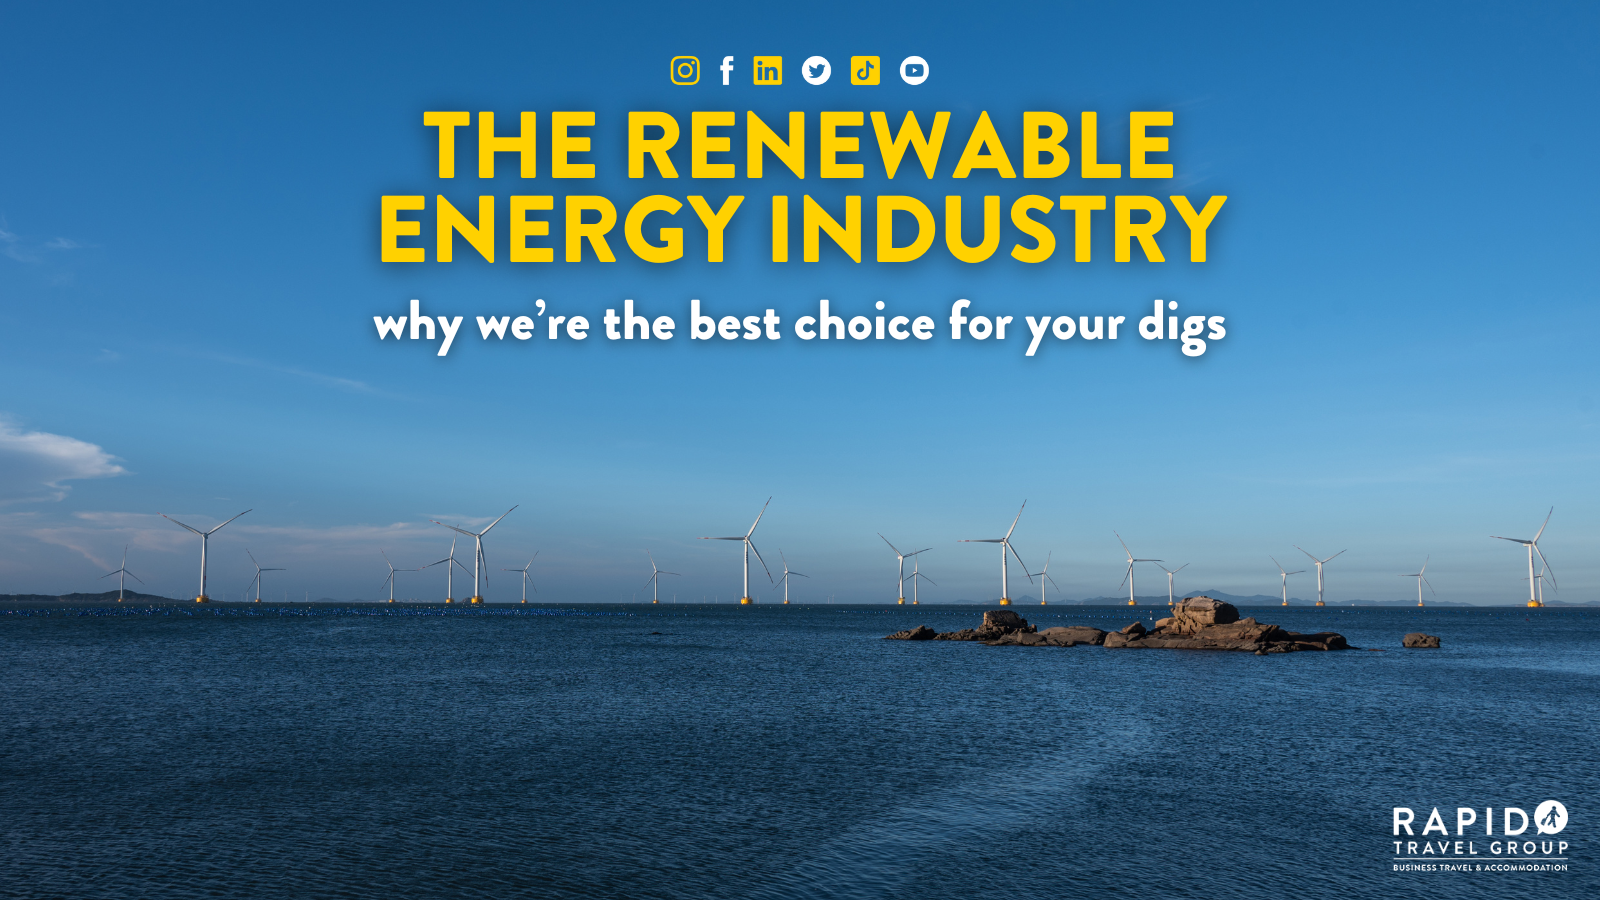 The Renewable Energy Industry why we’re the best choice for your digs